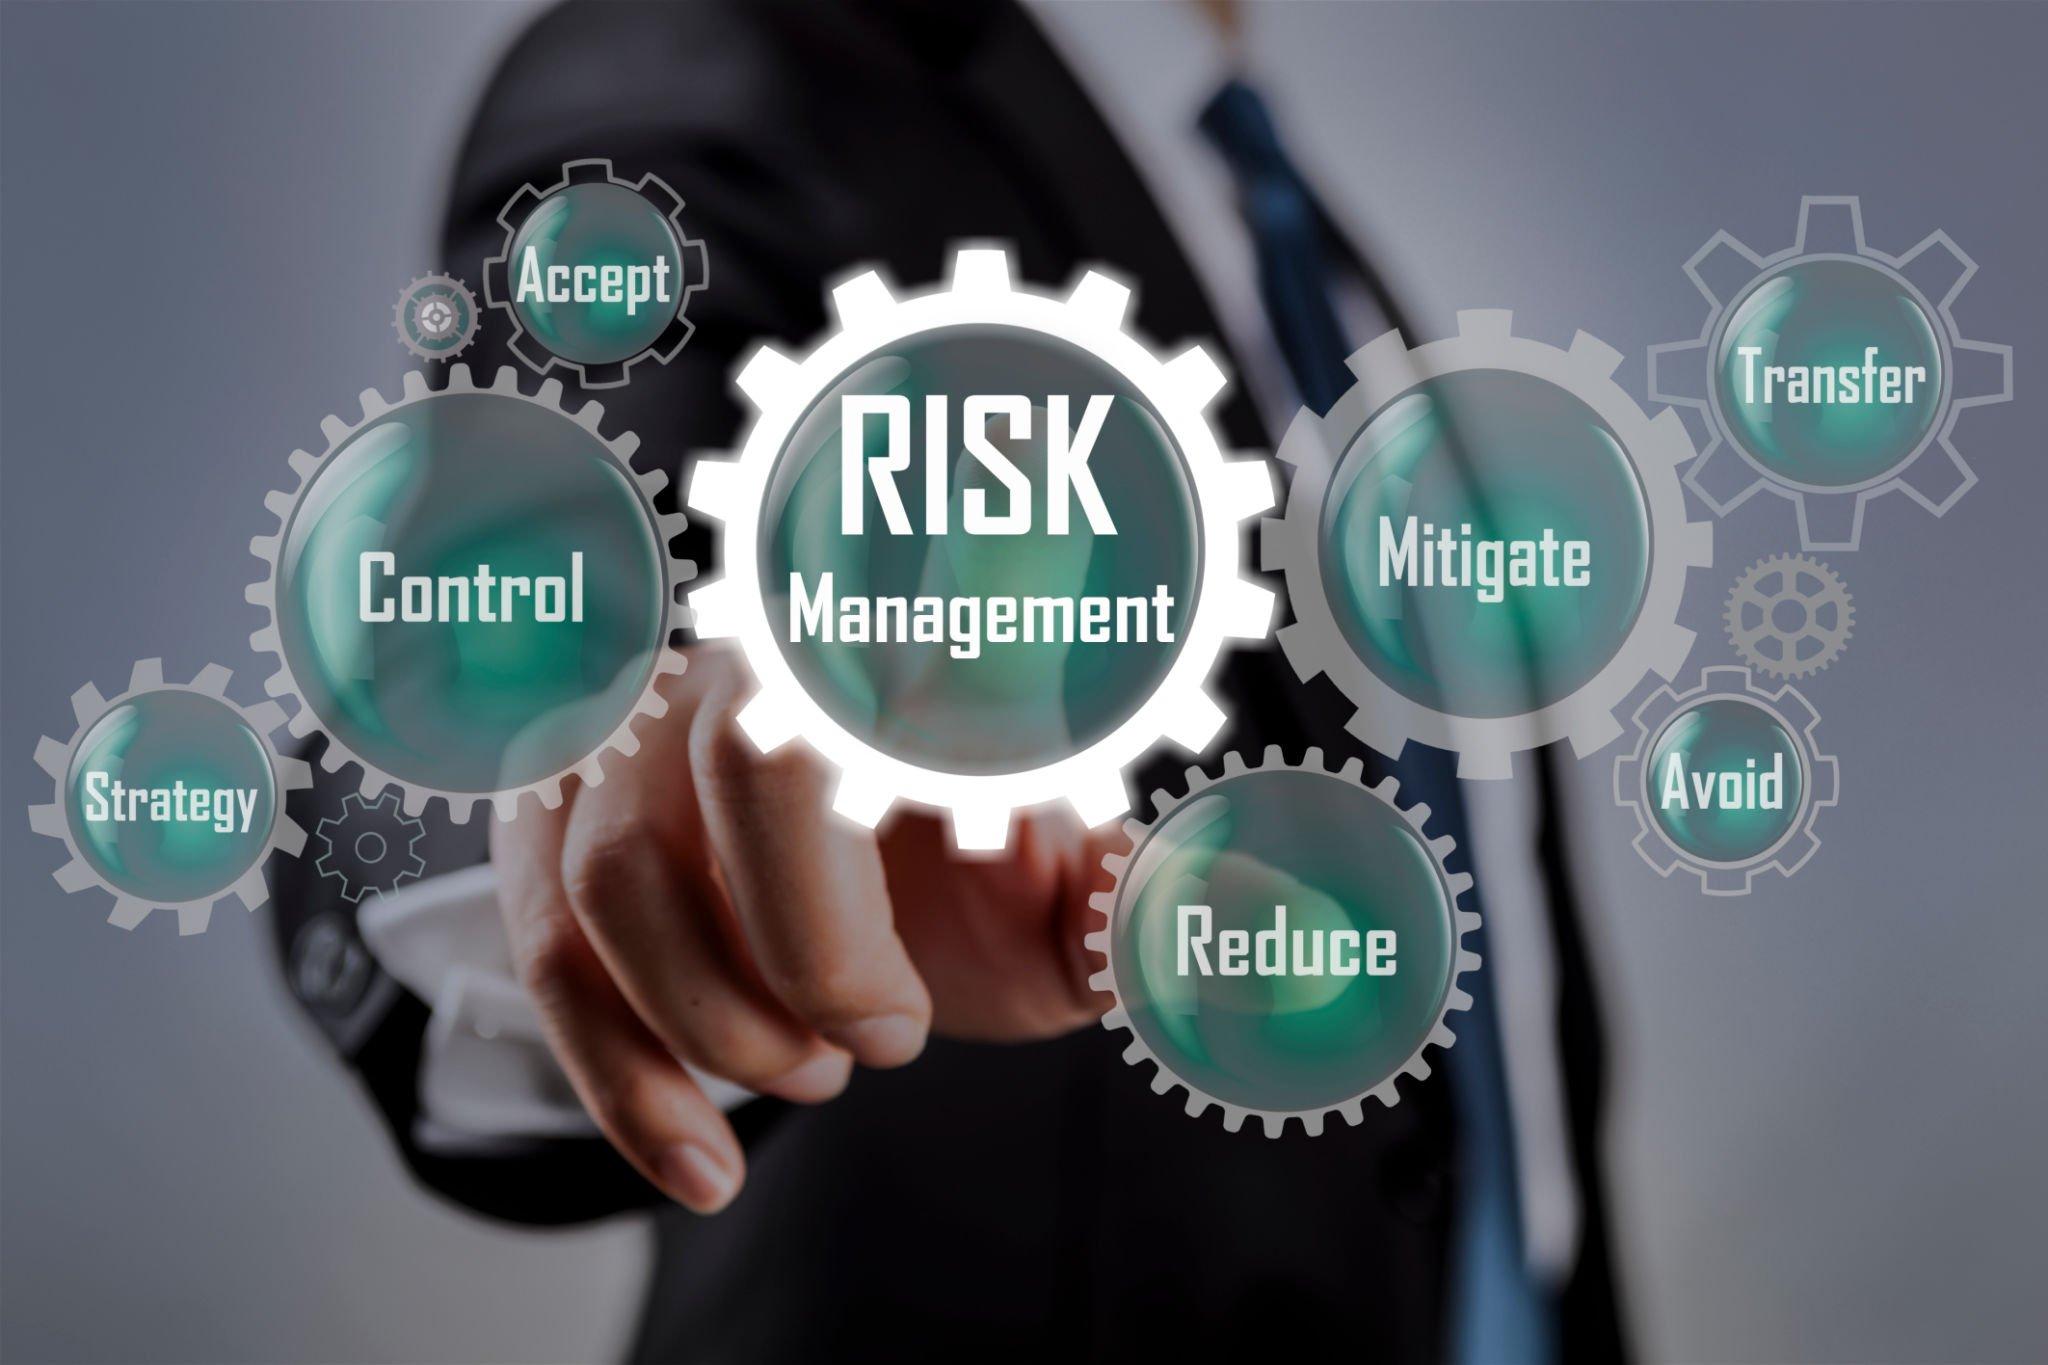 Risk Management In Business